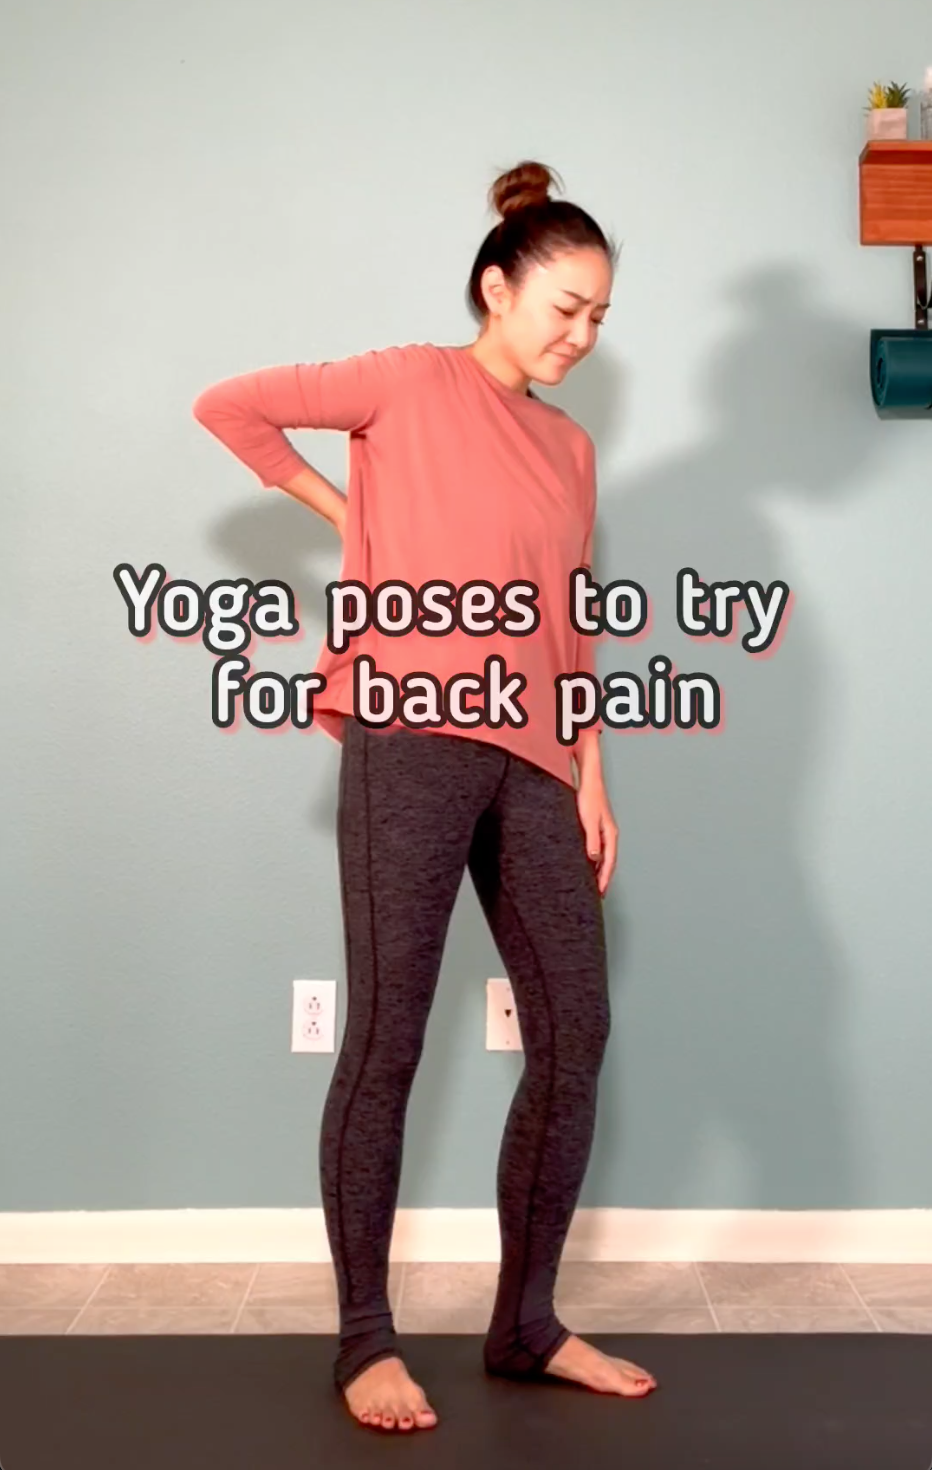 Yoga poses to try for back pain